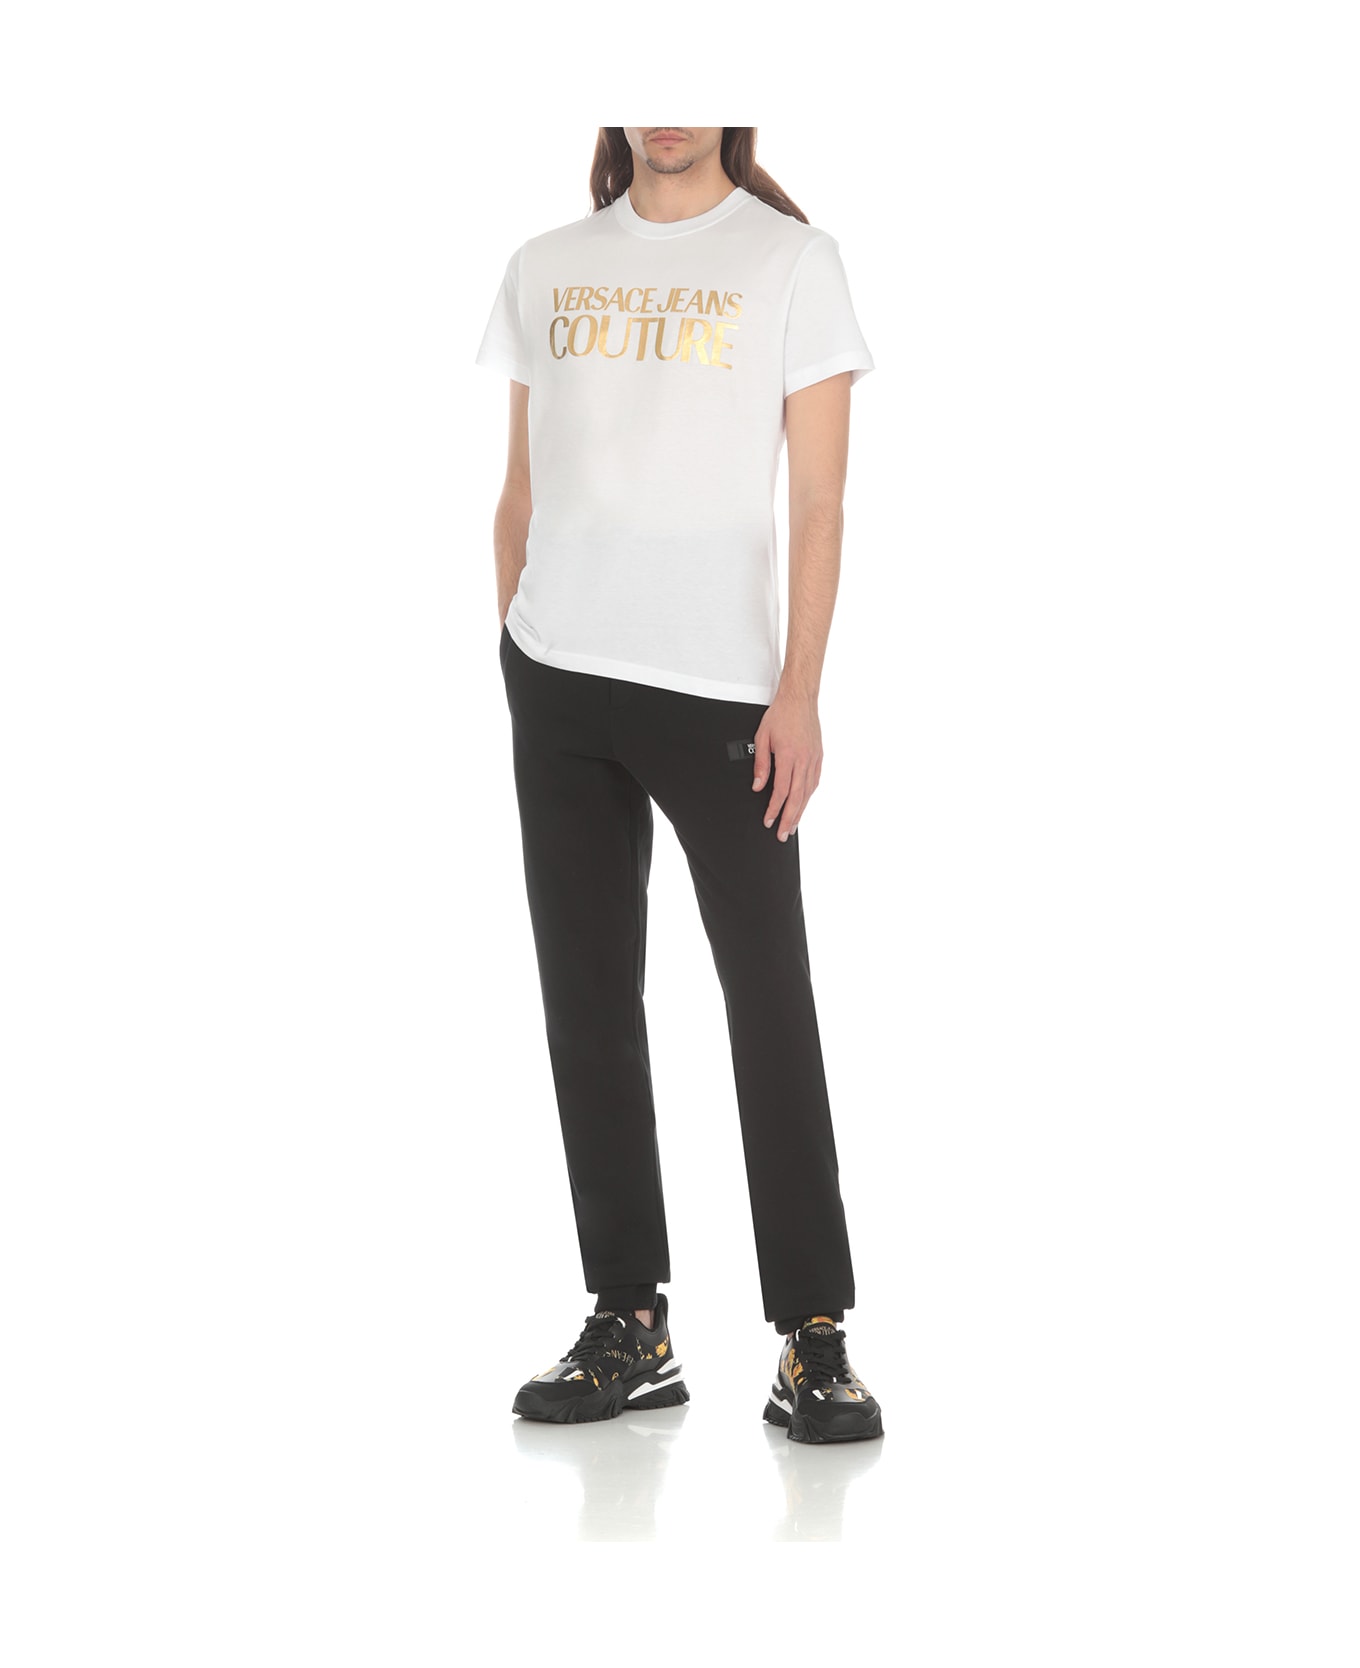 Versace Jeans Couture Trousers With Logo - Black